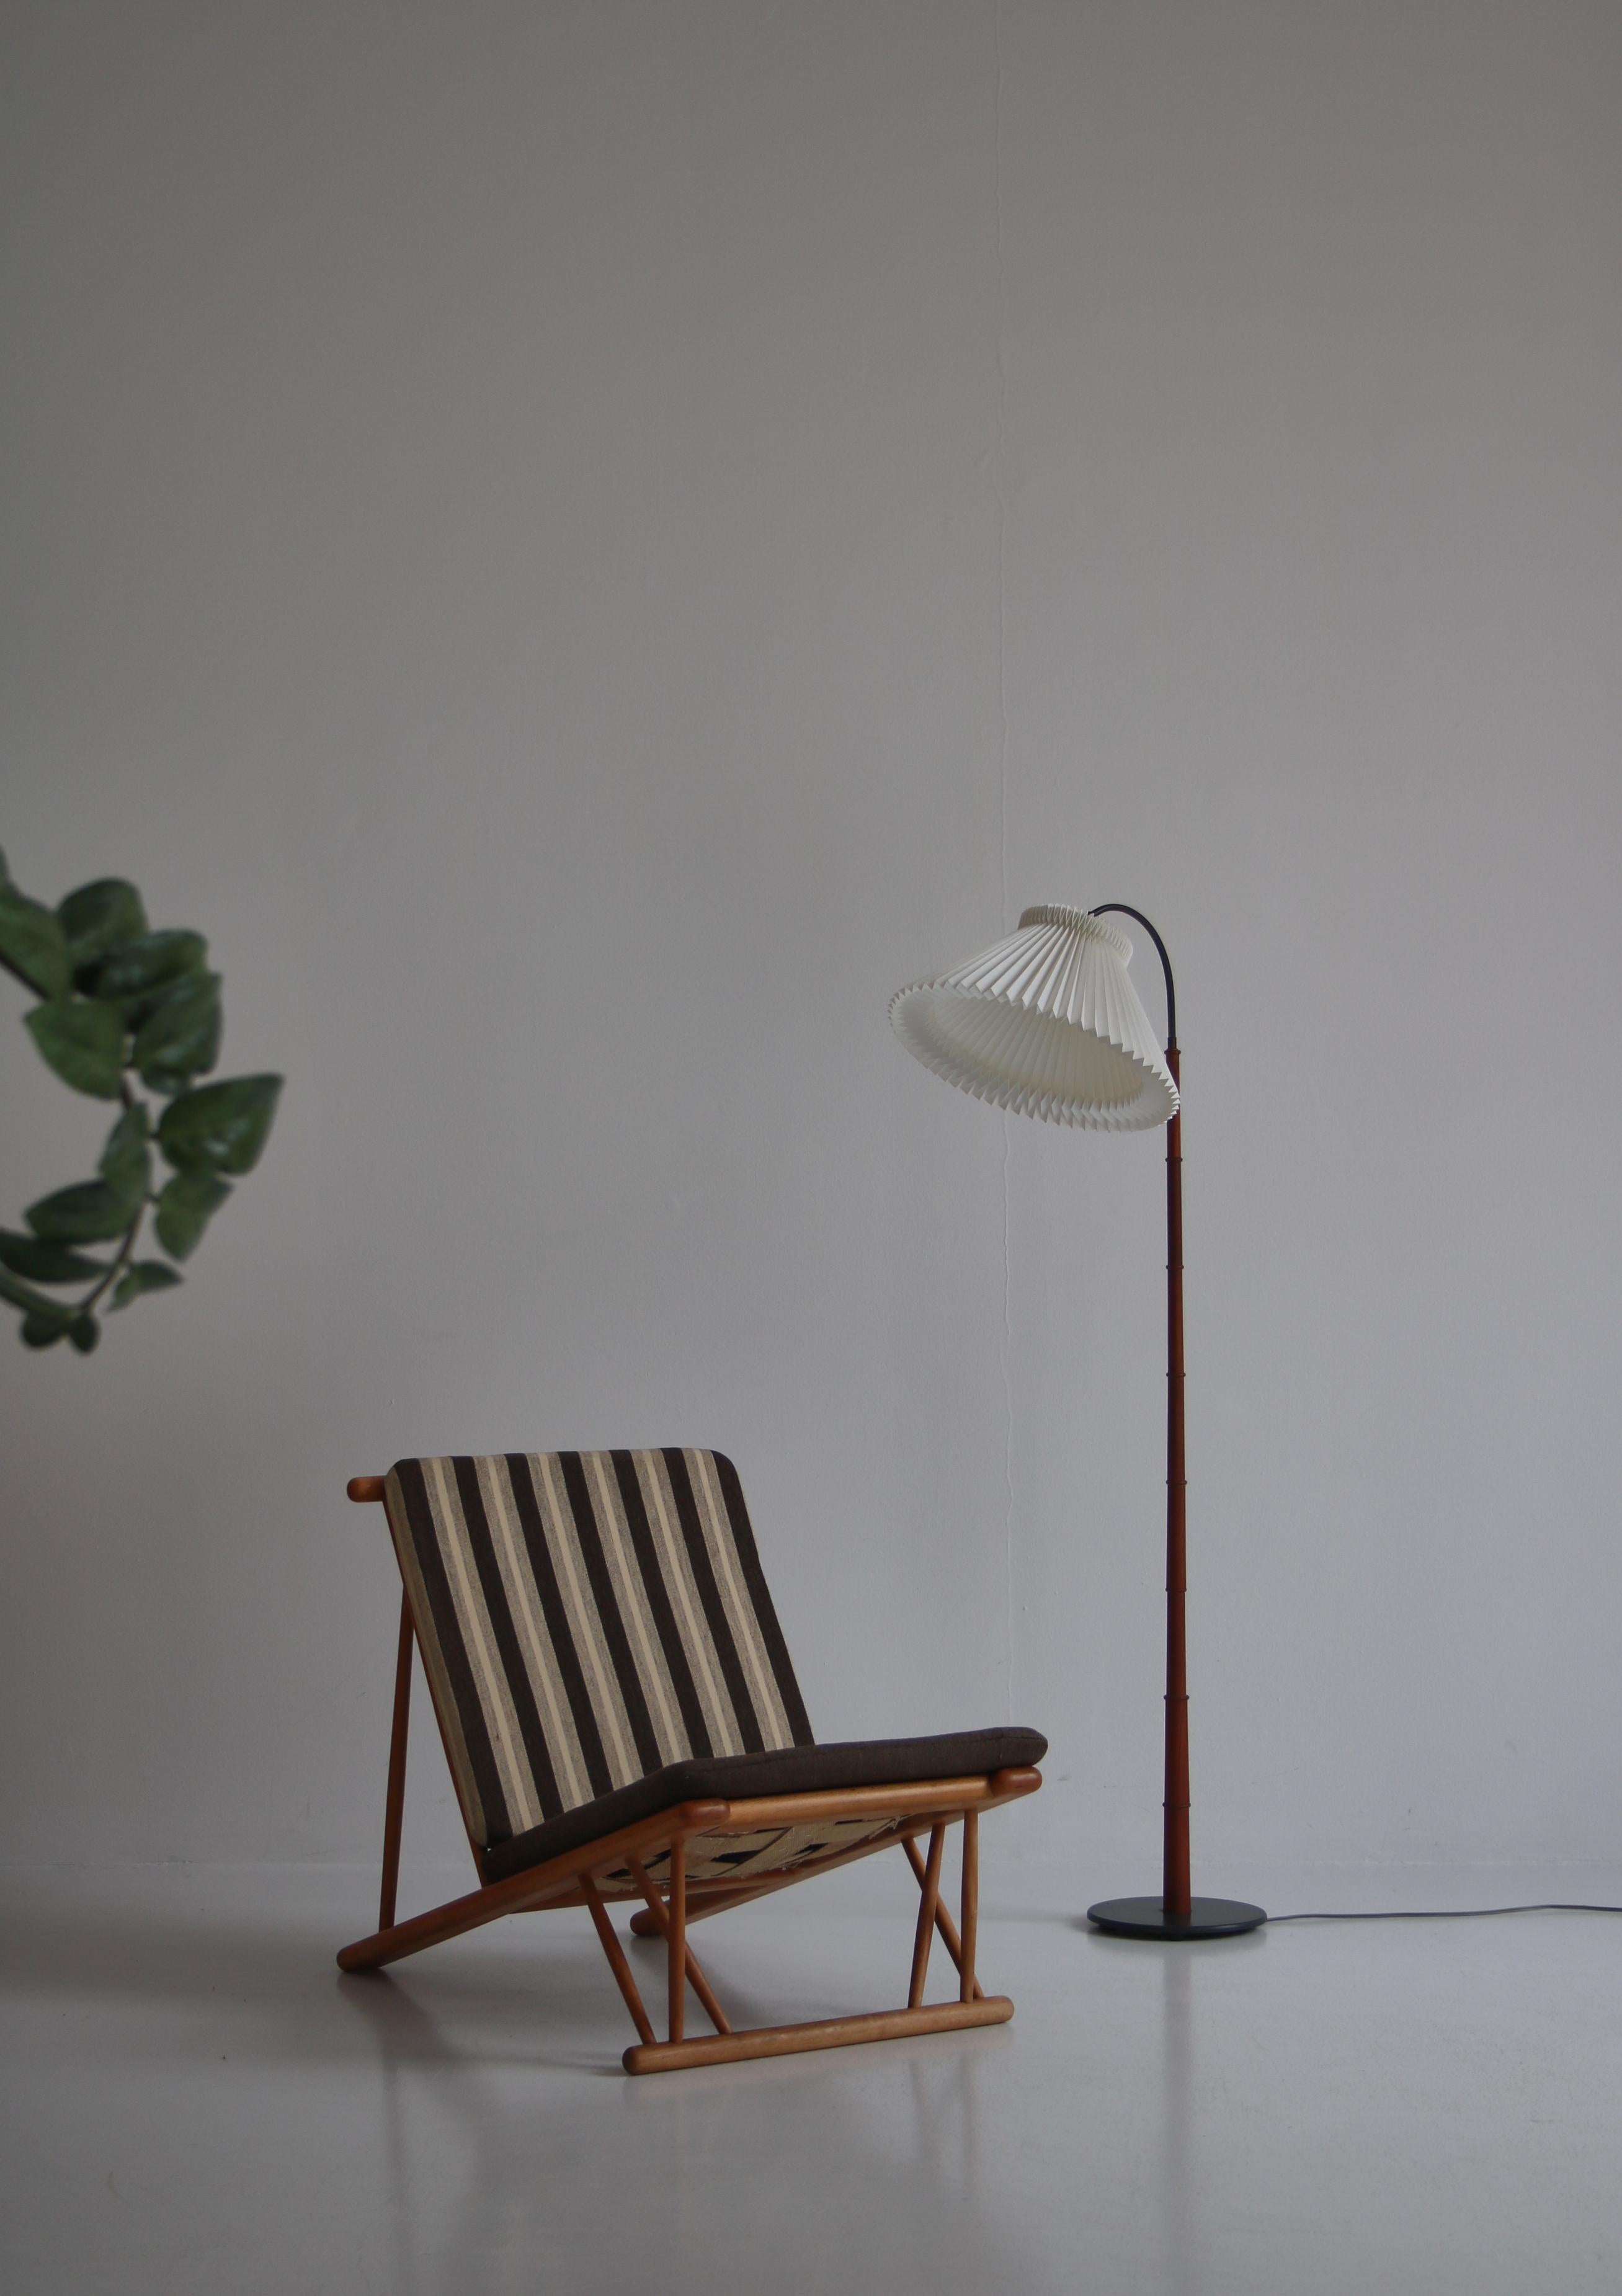 Beautiful and elegant Danish Modern floor lamp in teakwood adjustable shade. The lamp foot is made from grey lacquered iron. It is is mounted with a vintage hand folded acrylic Le Klint shade that can be adjusted in any direction. The style is